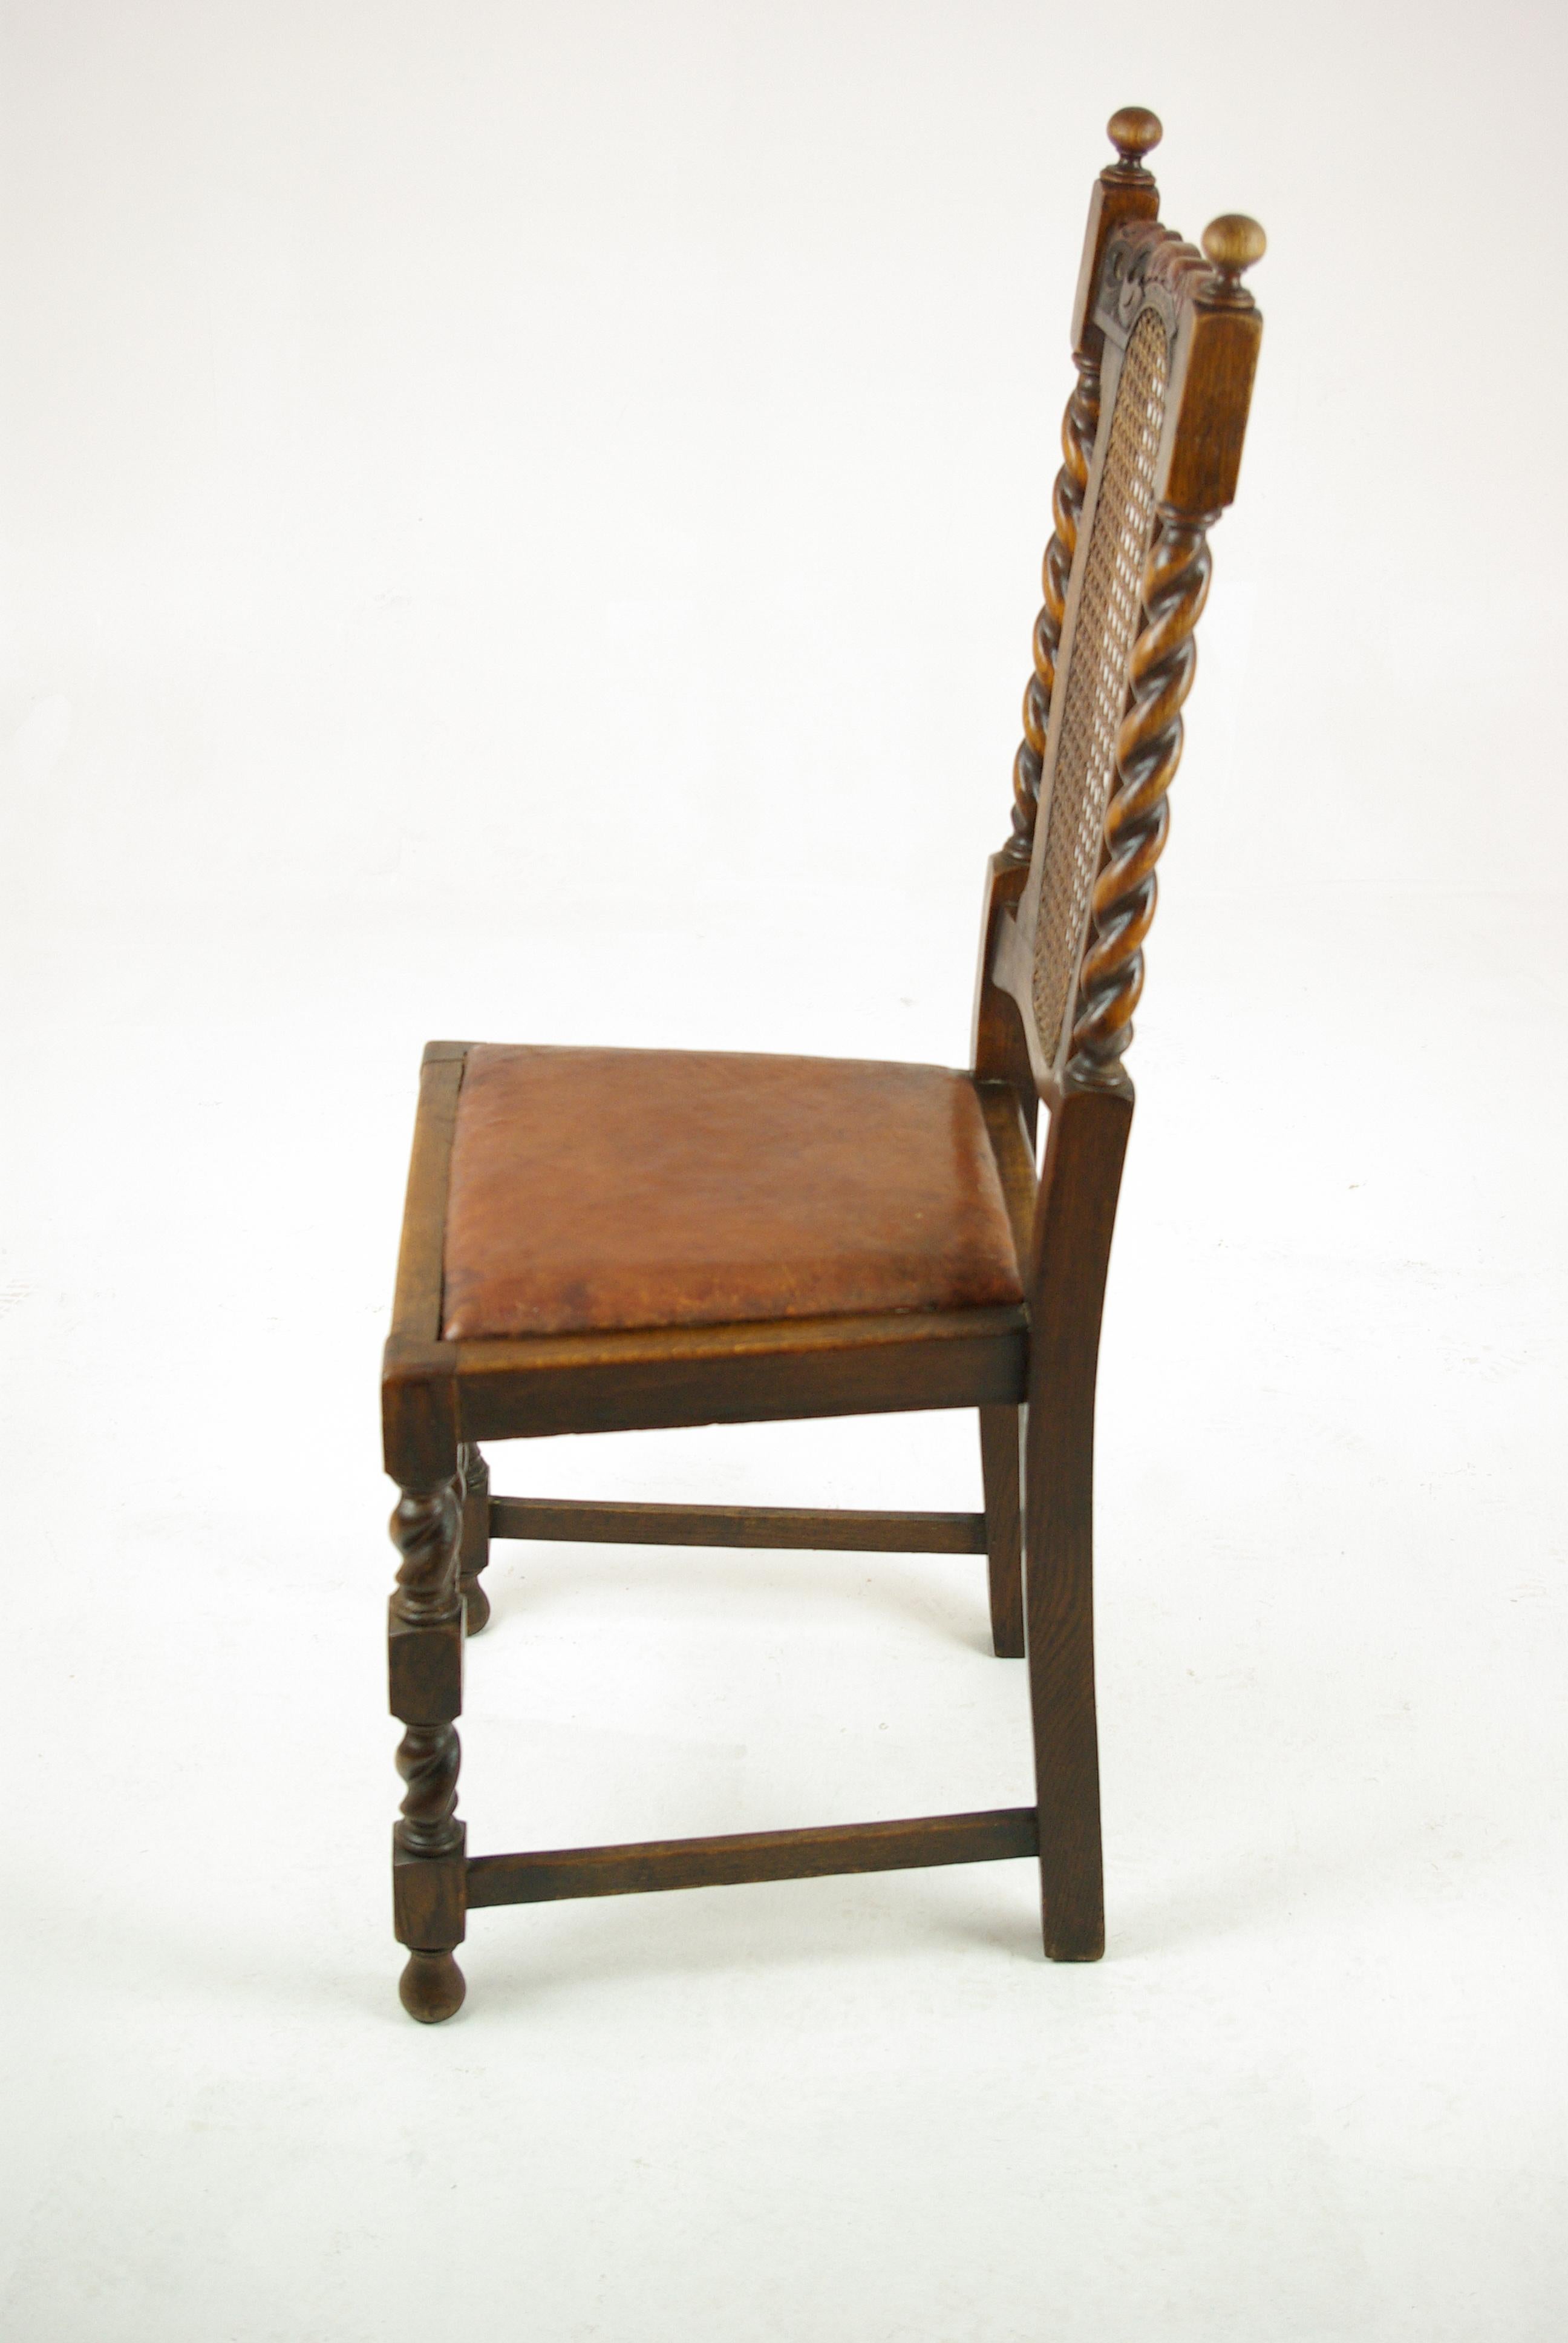 4 Antique Dining Chairs, Barley Twist Chairs, Oak Dining Chairs, 1920 1